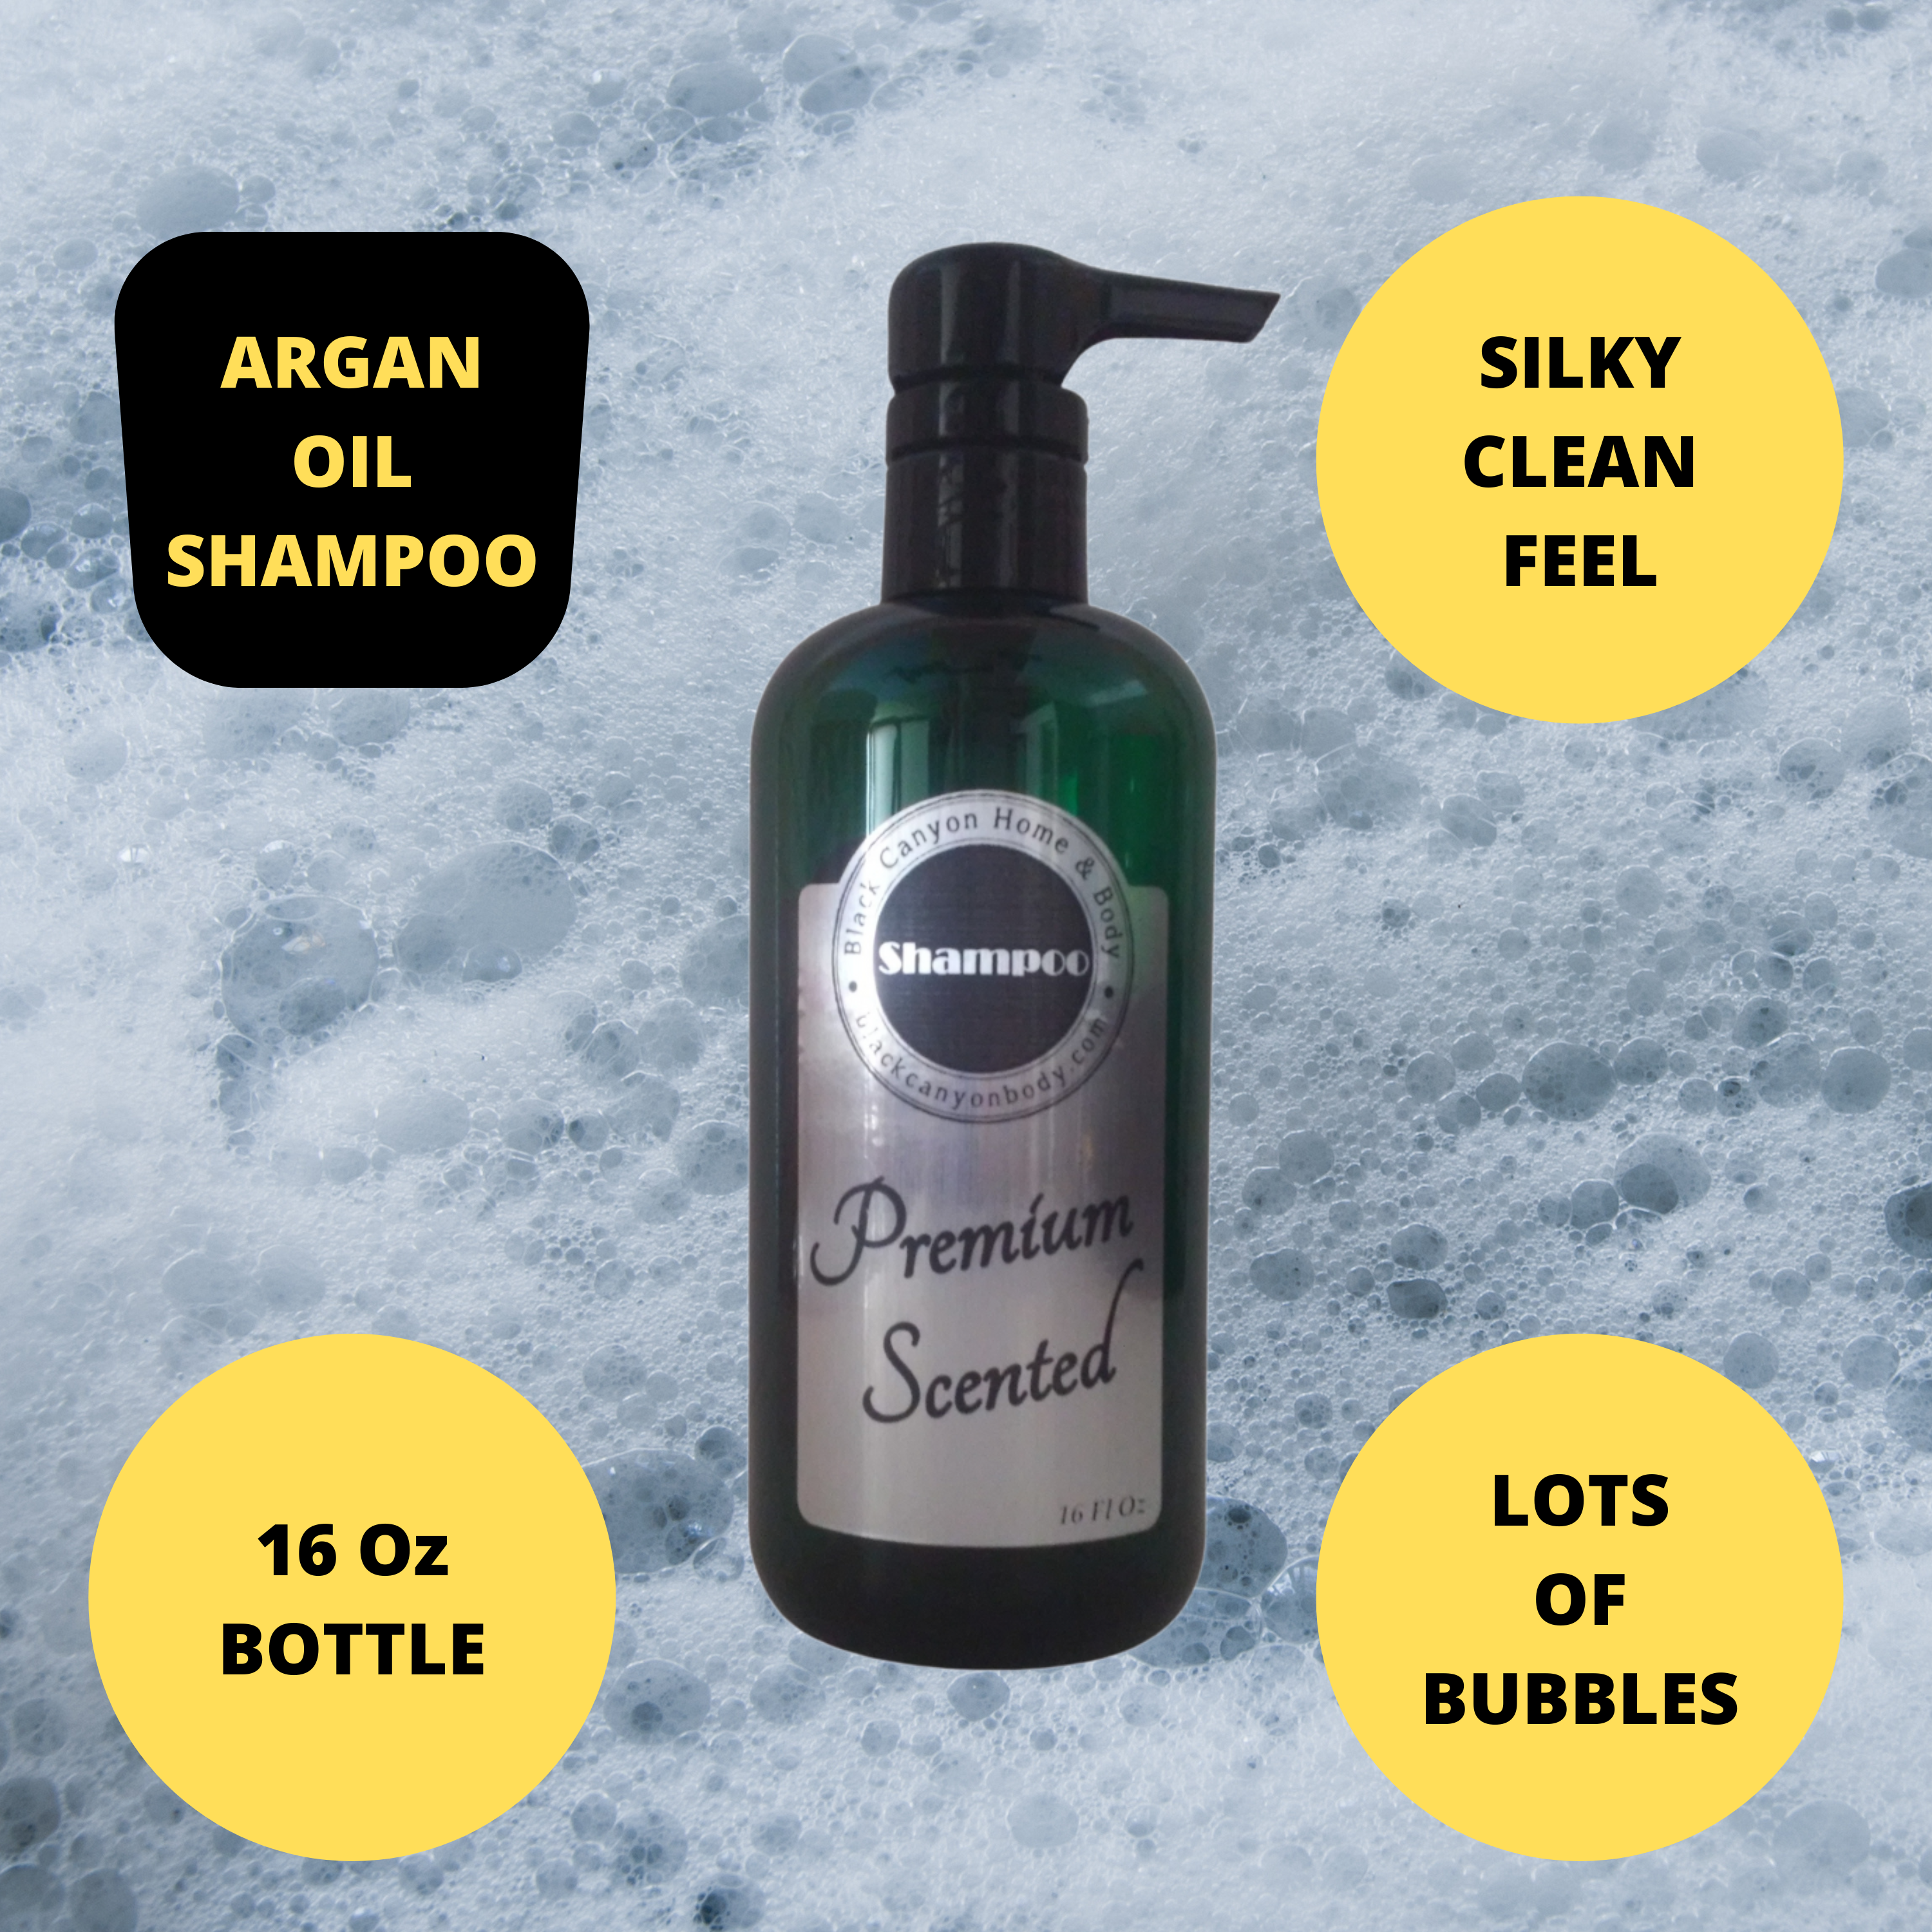 Black Canyon Clove & Patchouli Scented Shampoo with Argan Oil